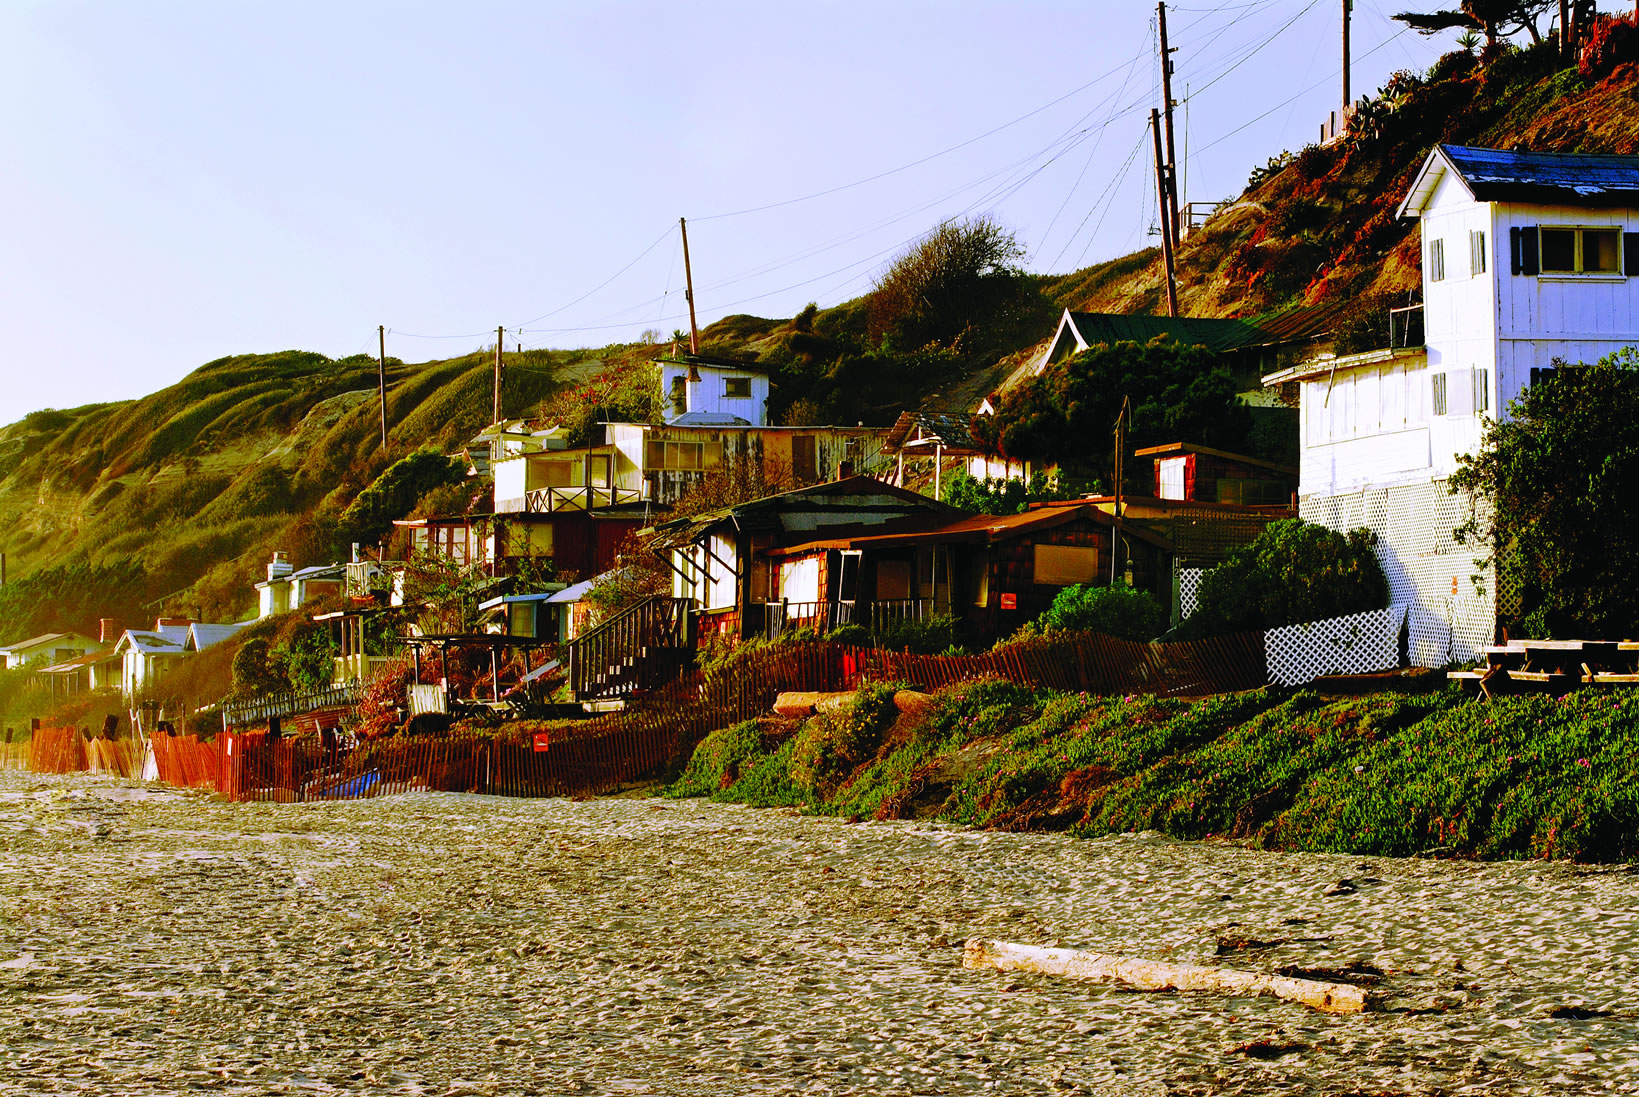 Crystal_Cove_North_Beach_area_request_by_Laura-(ZF-2229-58183-1-008)_cmyk